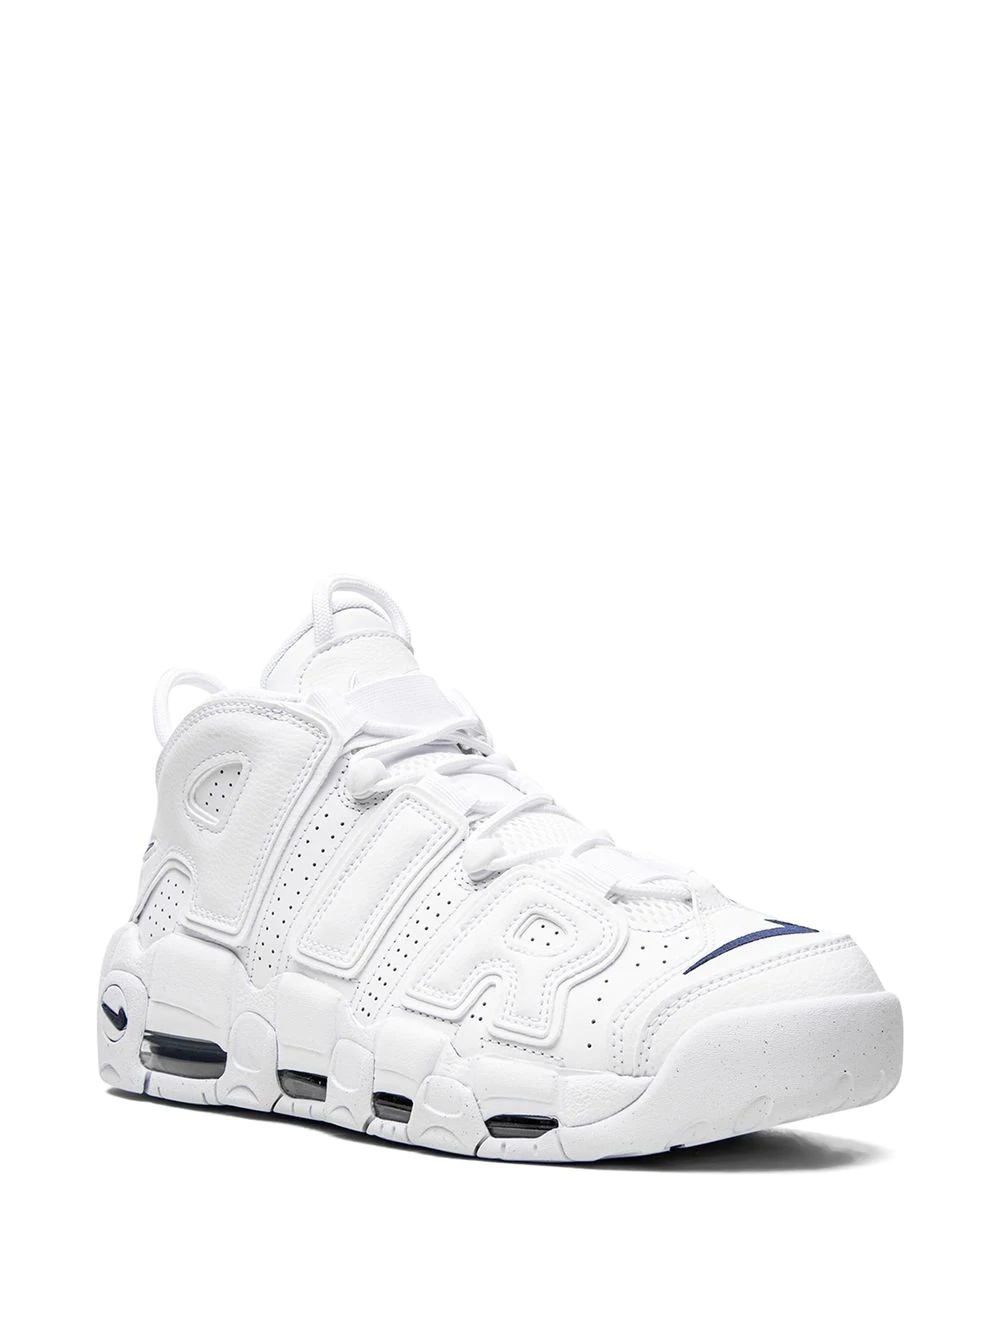 Air More Uptempo "White/Midnight Navy" sneakers - 2